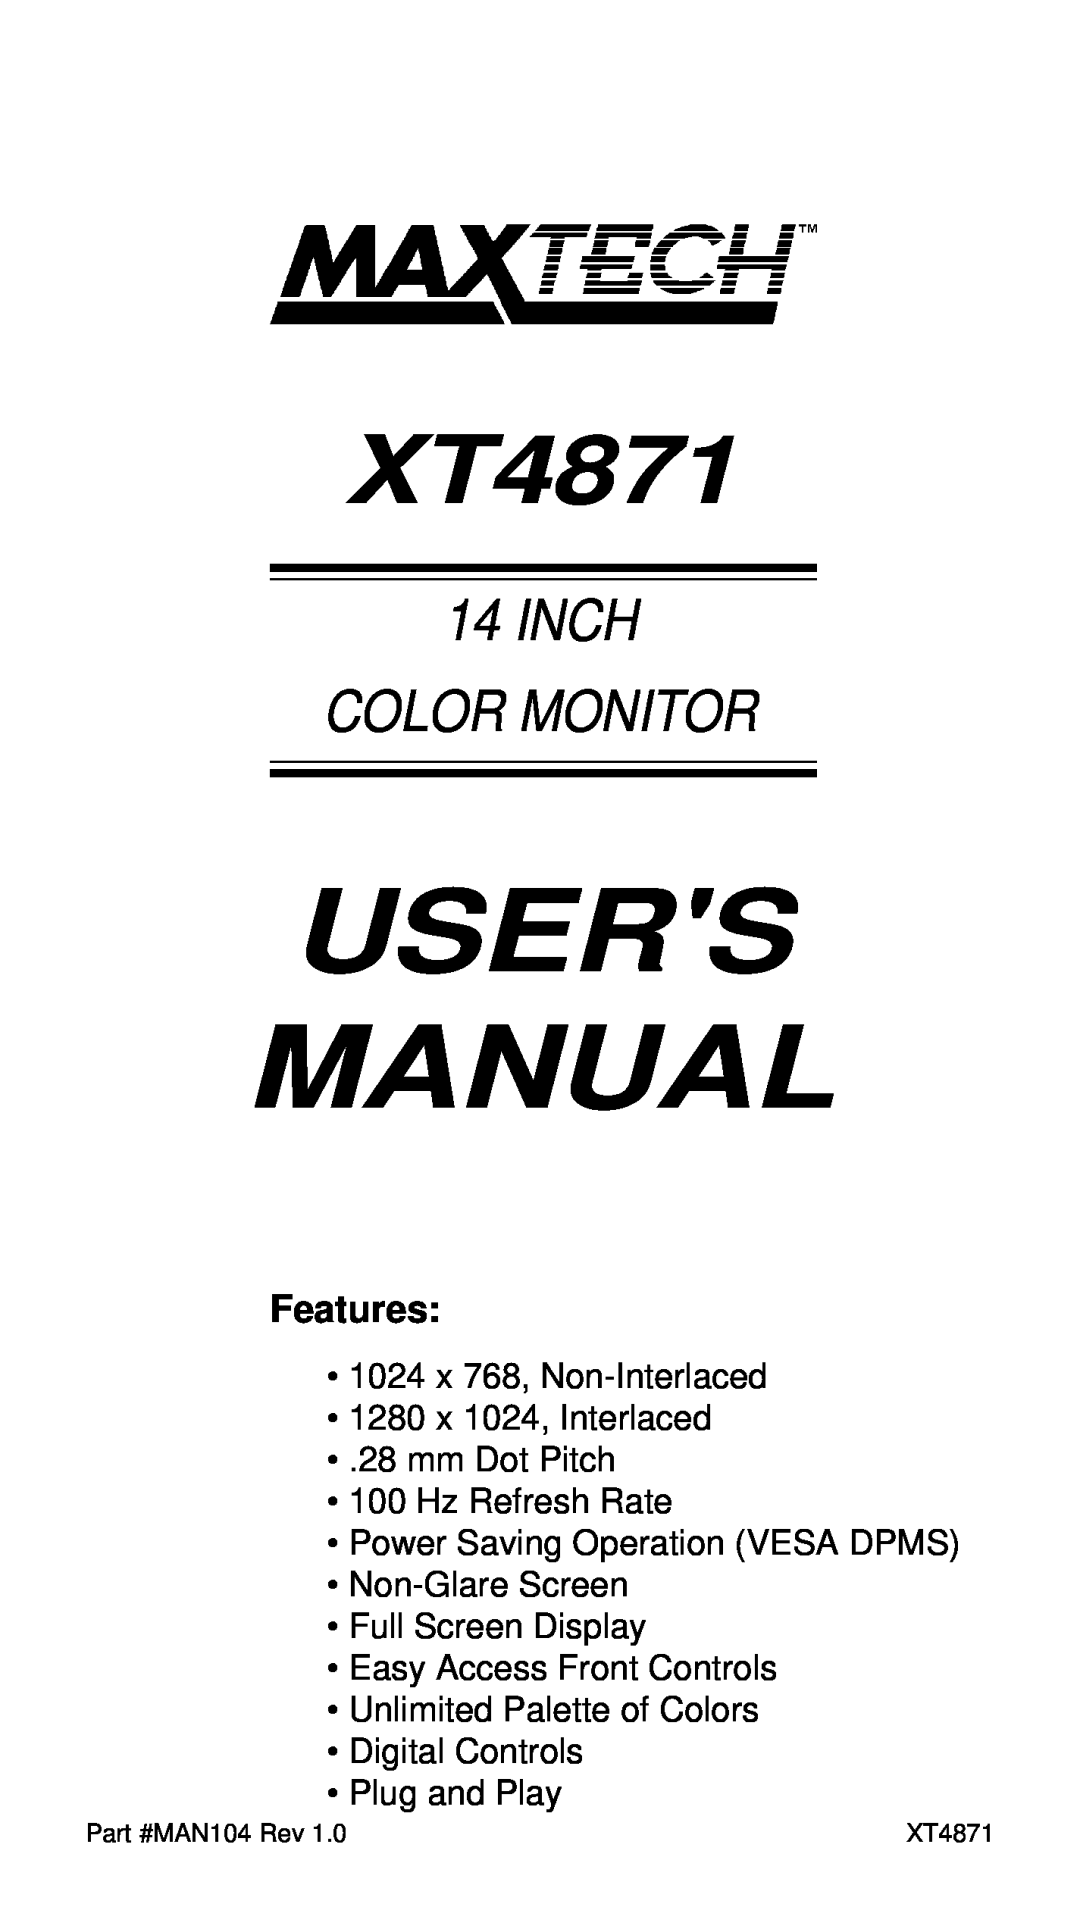 MaxTech XT4871 user manual Inch Color Monitor, Features, Hz Refresh Rate Power Saving Operation VESA DPMS Non-Glare Screen 